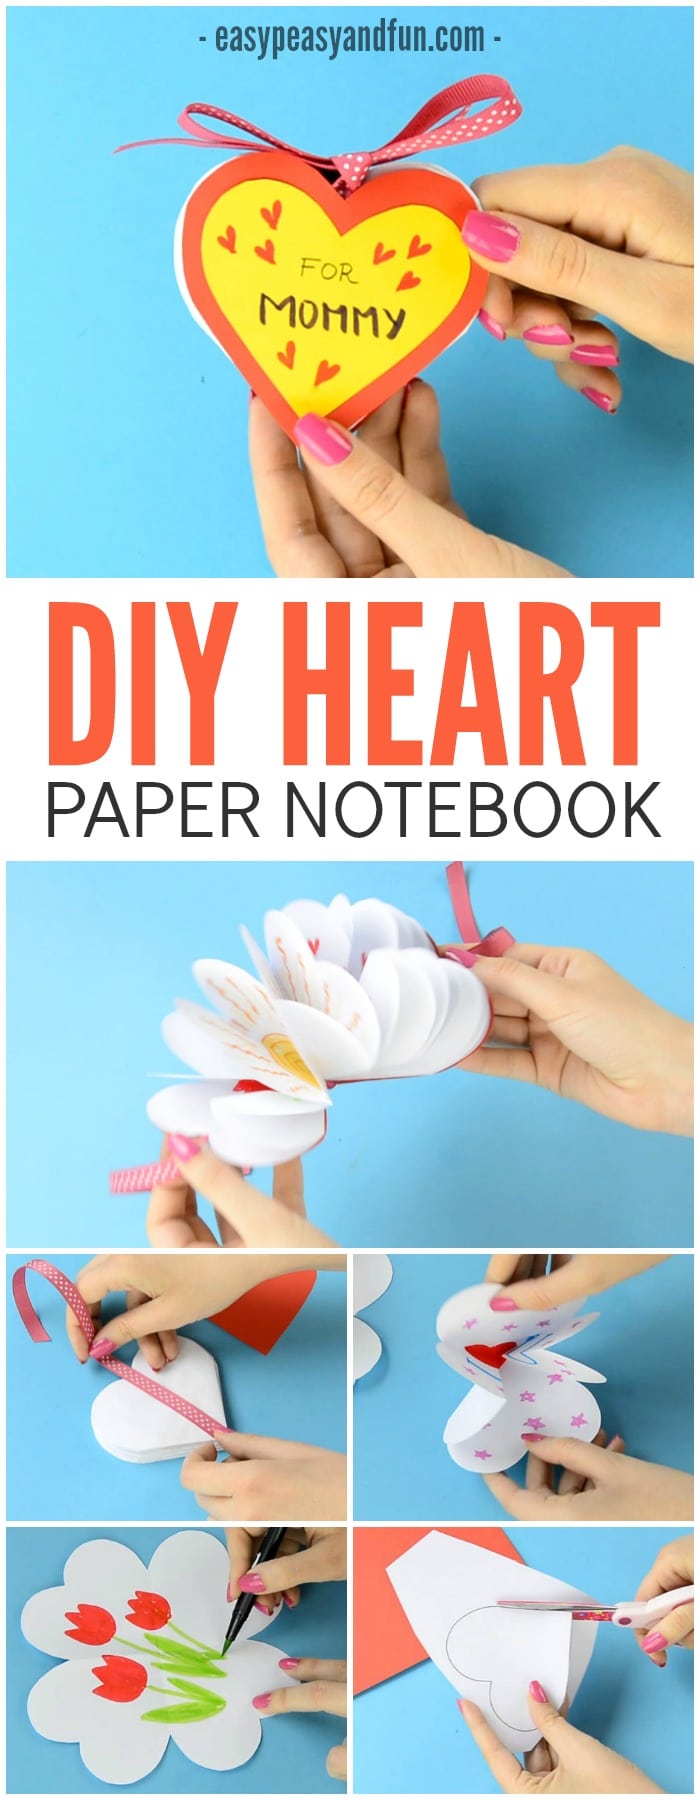 Lovely DIY Heart Notebook Craft for Kids to Make